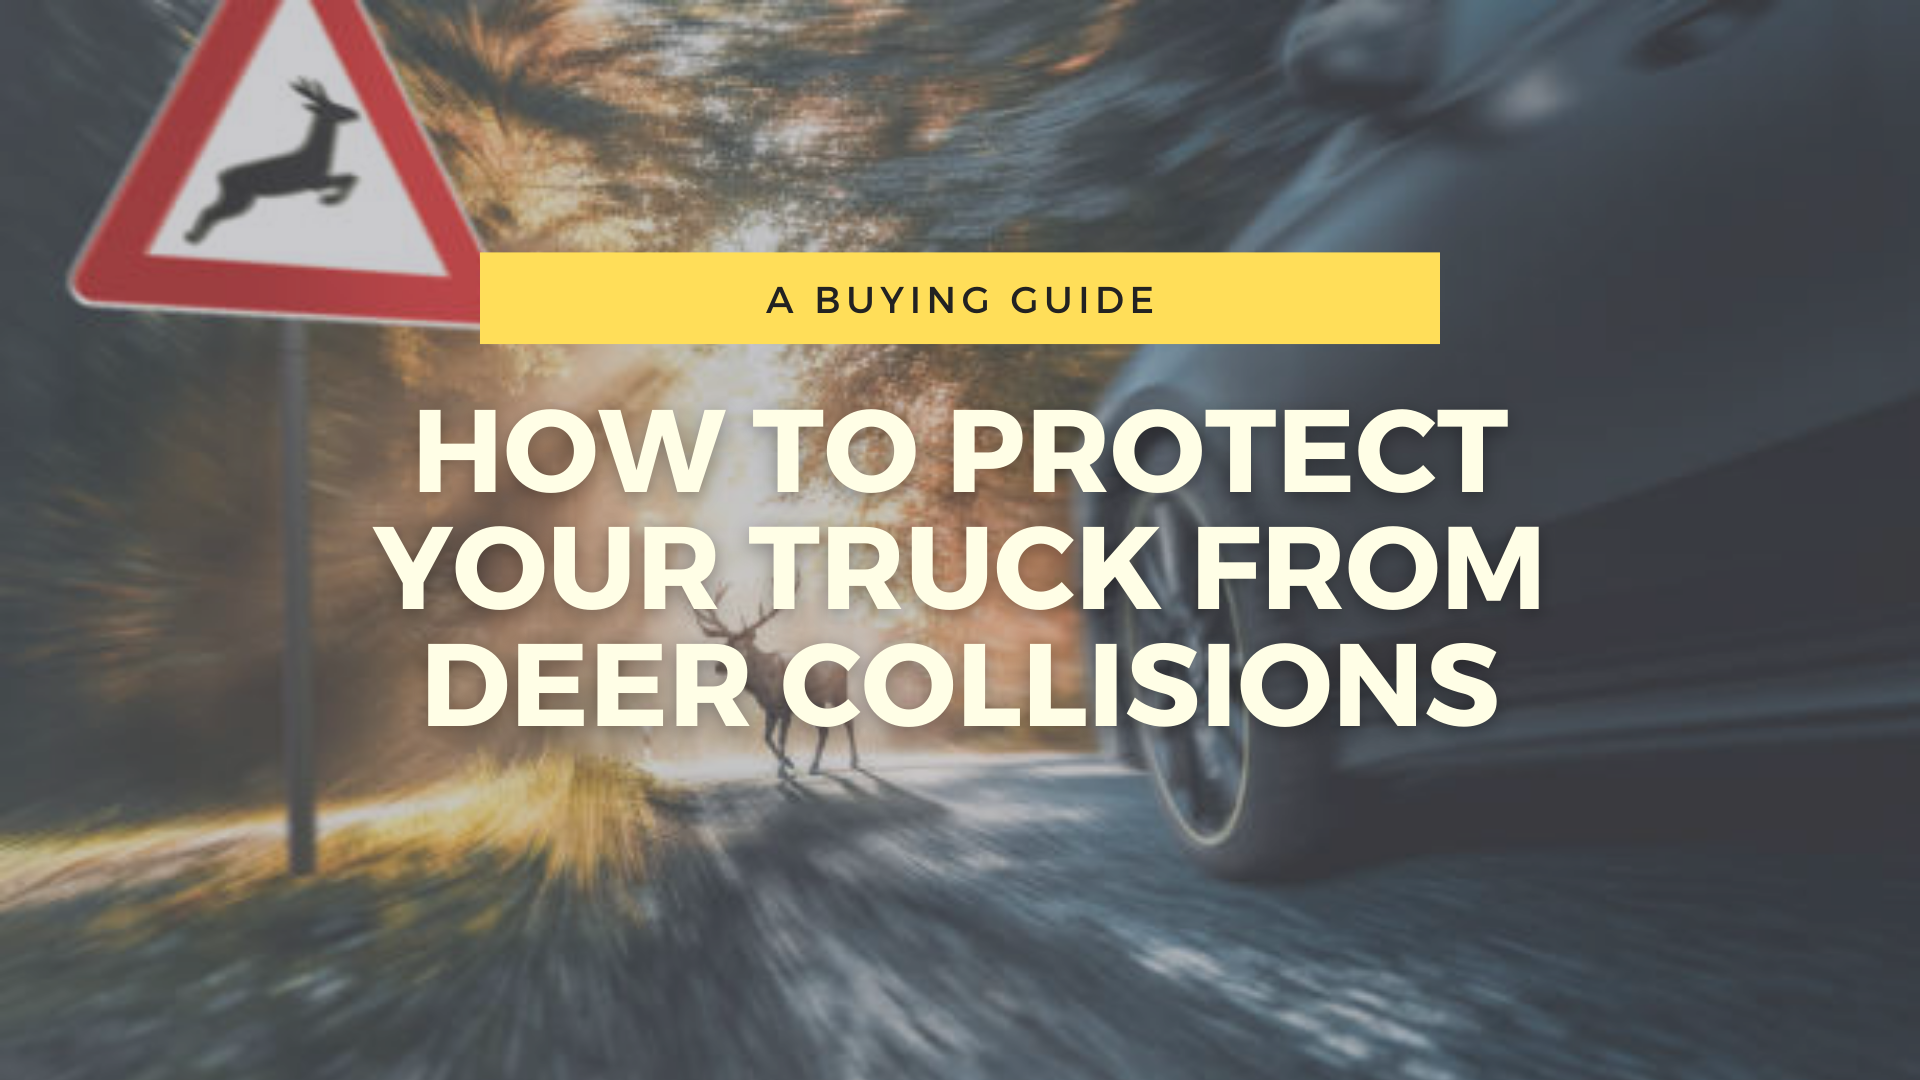 How To Protect Your Truck From Deer Collisions